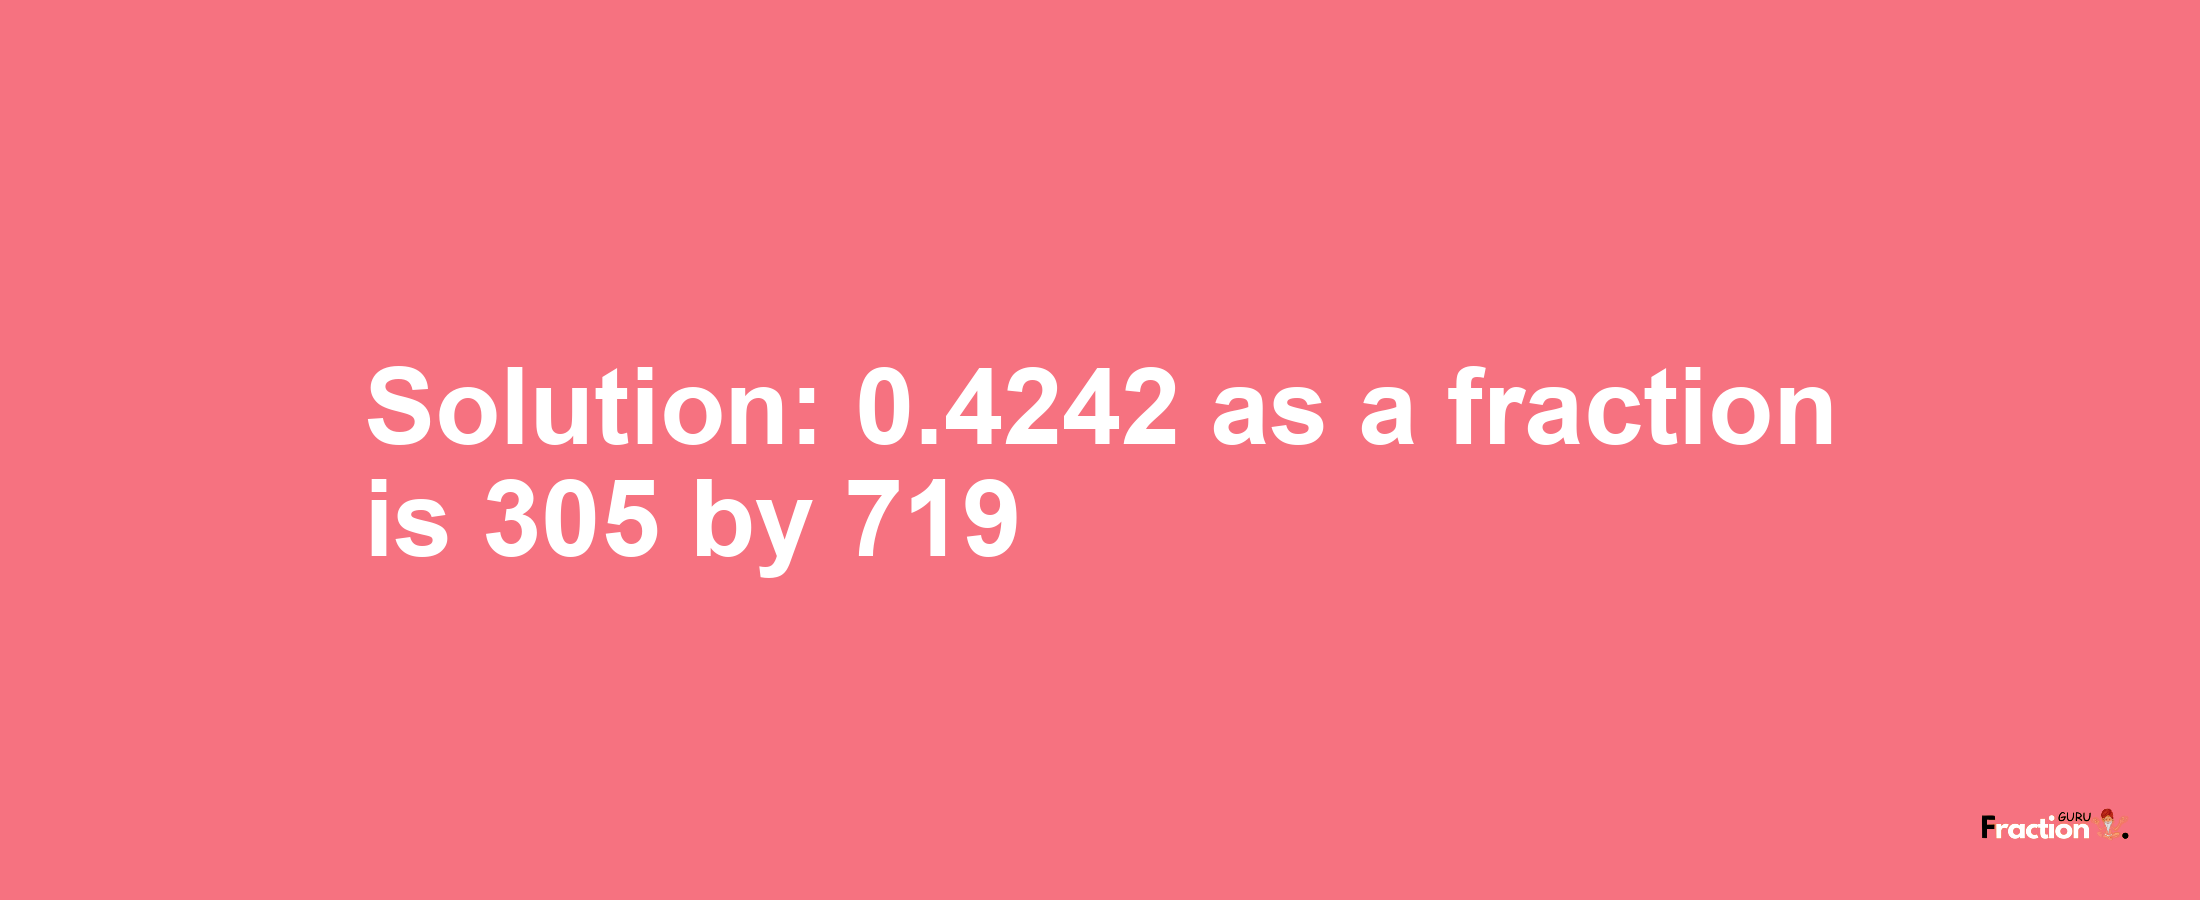 Solution:0.4242 as a fraction is 305/719